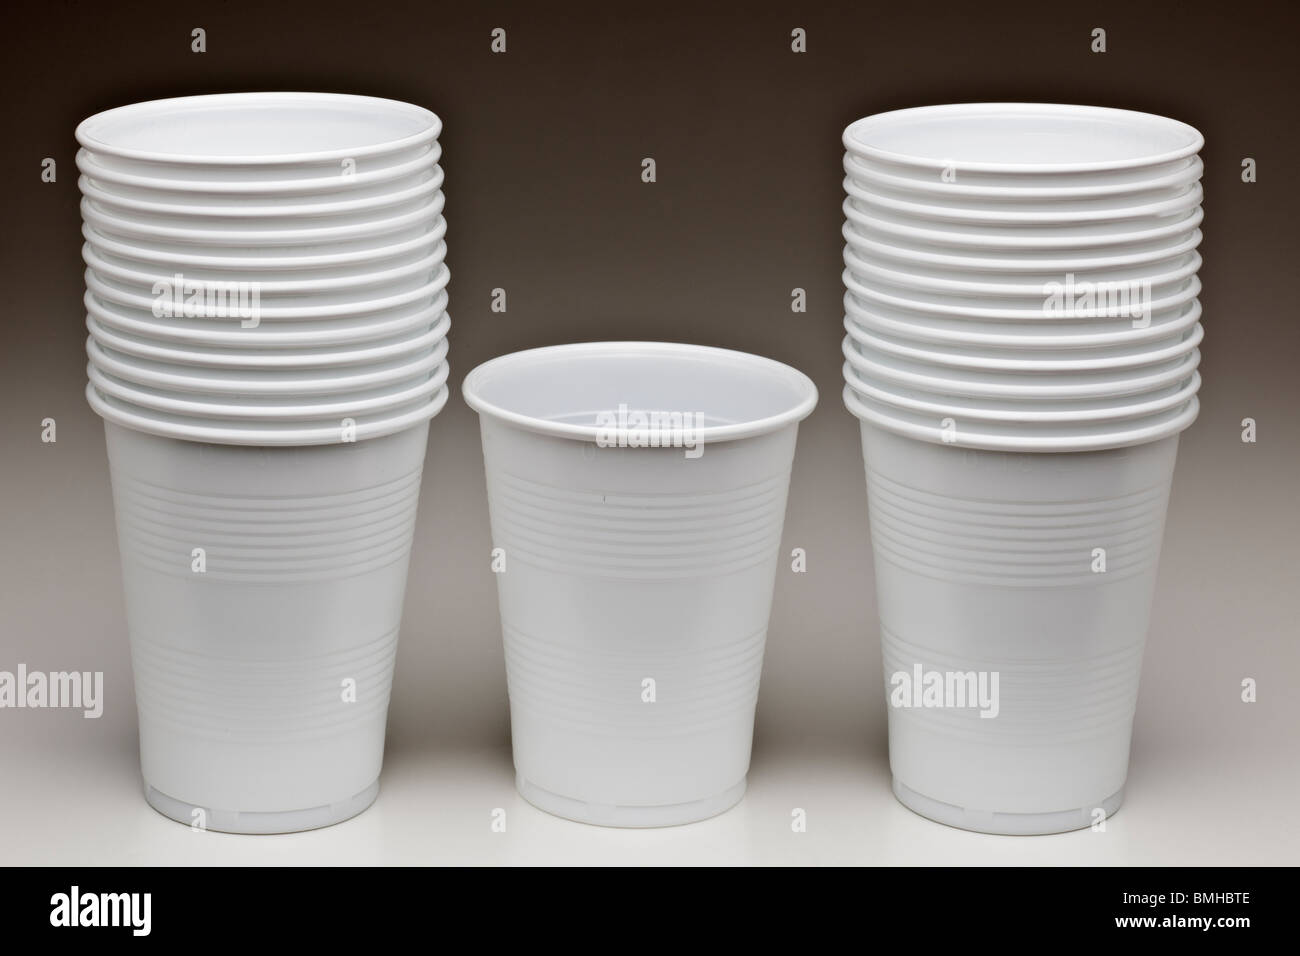 https://c8.alamy.com/comp/BMHBTE/stacked-pile-of-disposable-unused-plastic-cups-BMHBTE.jpg